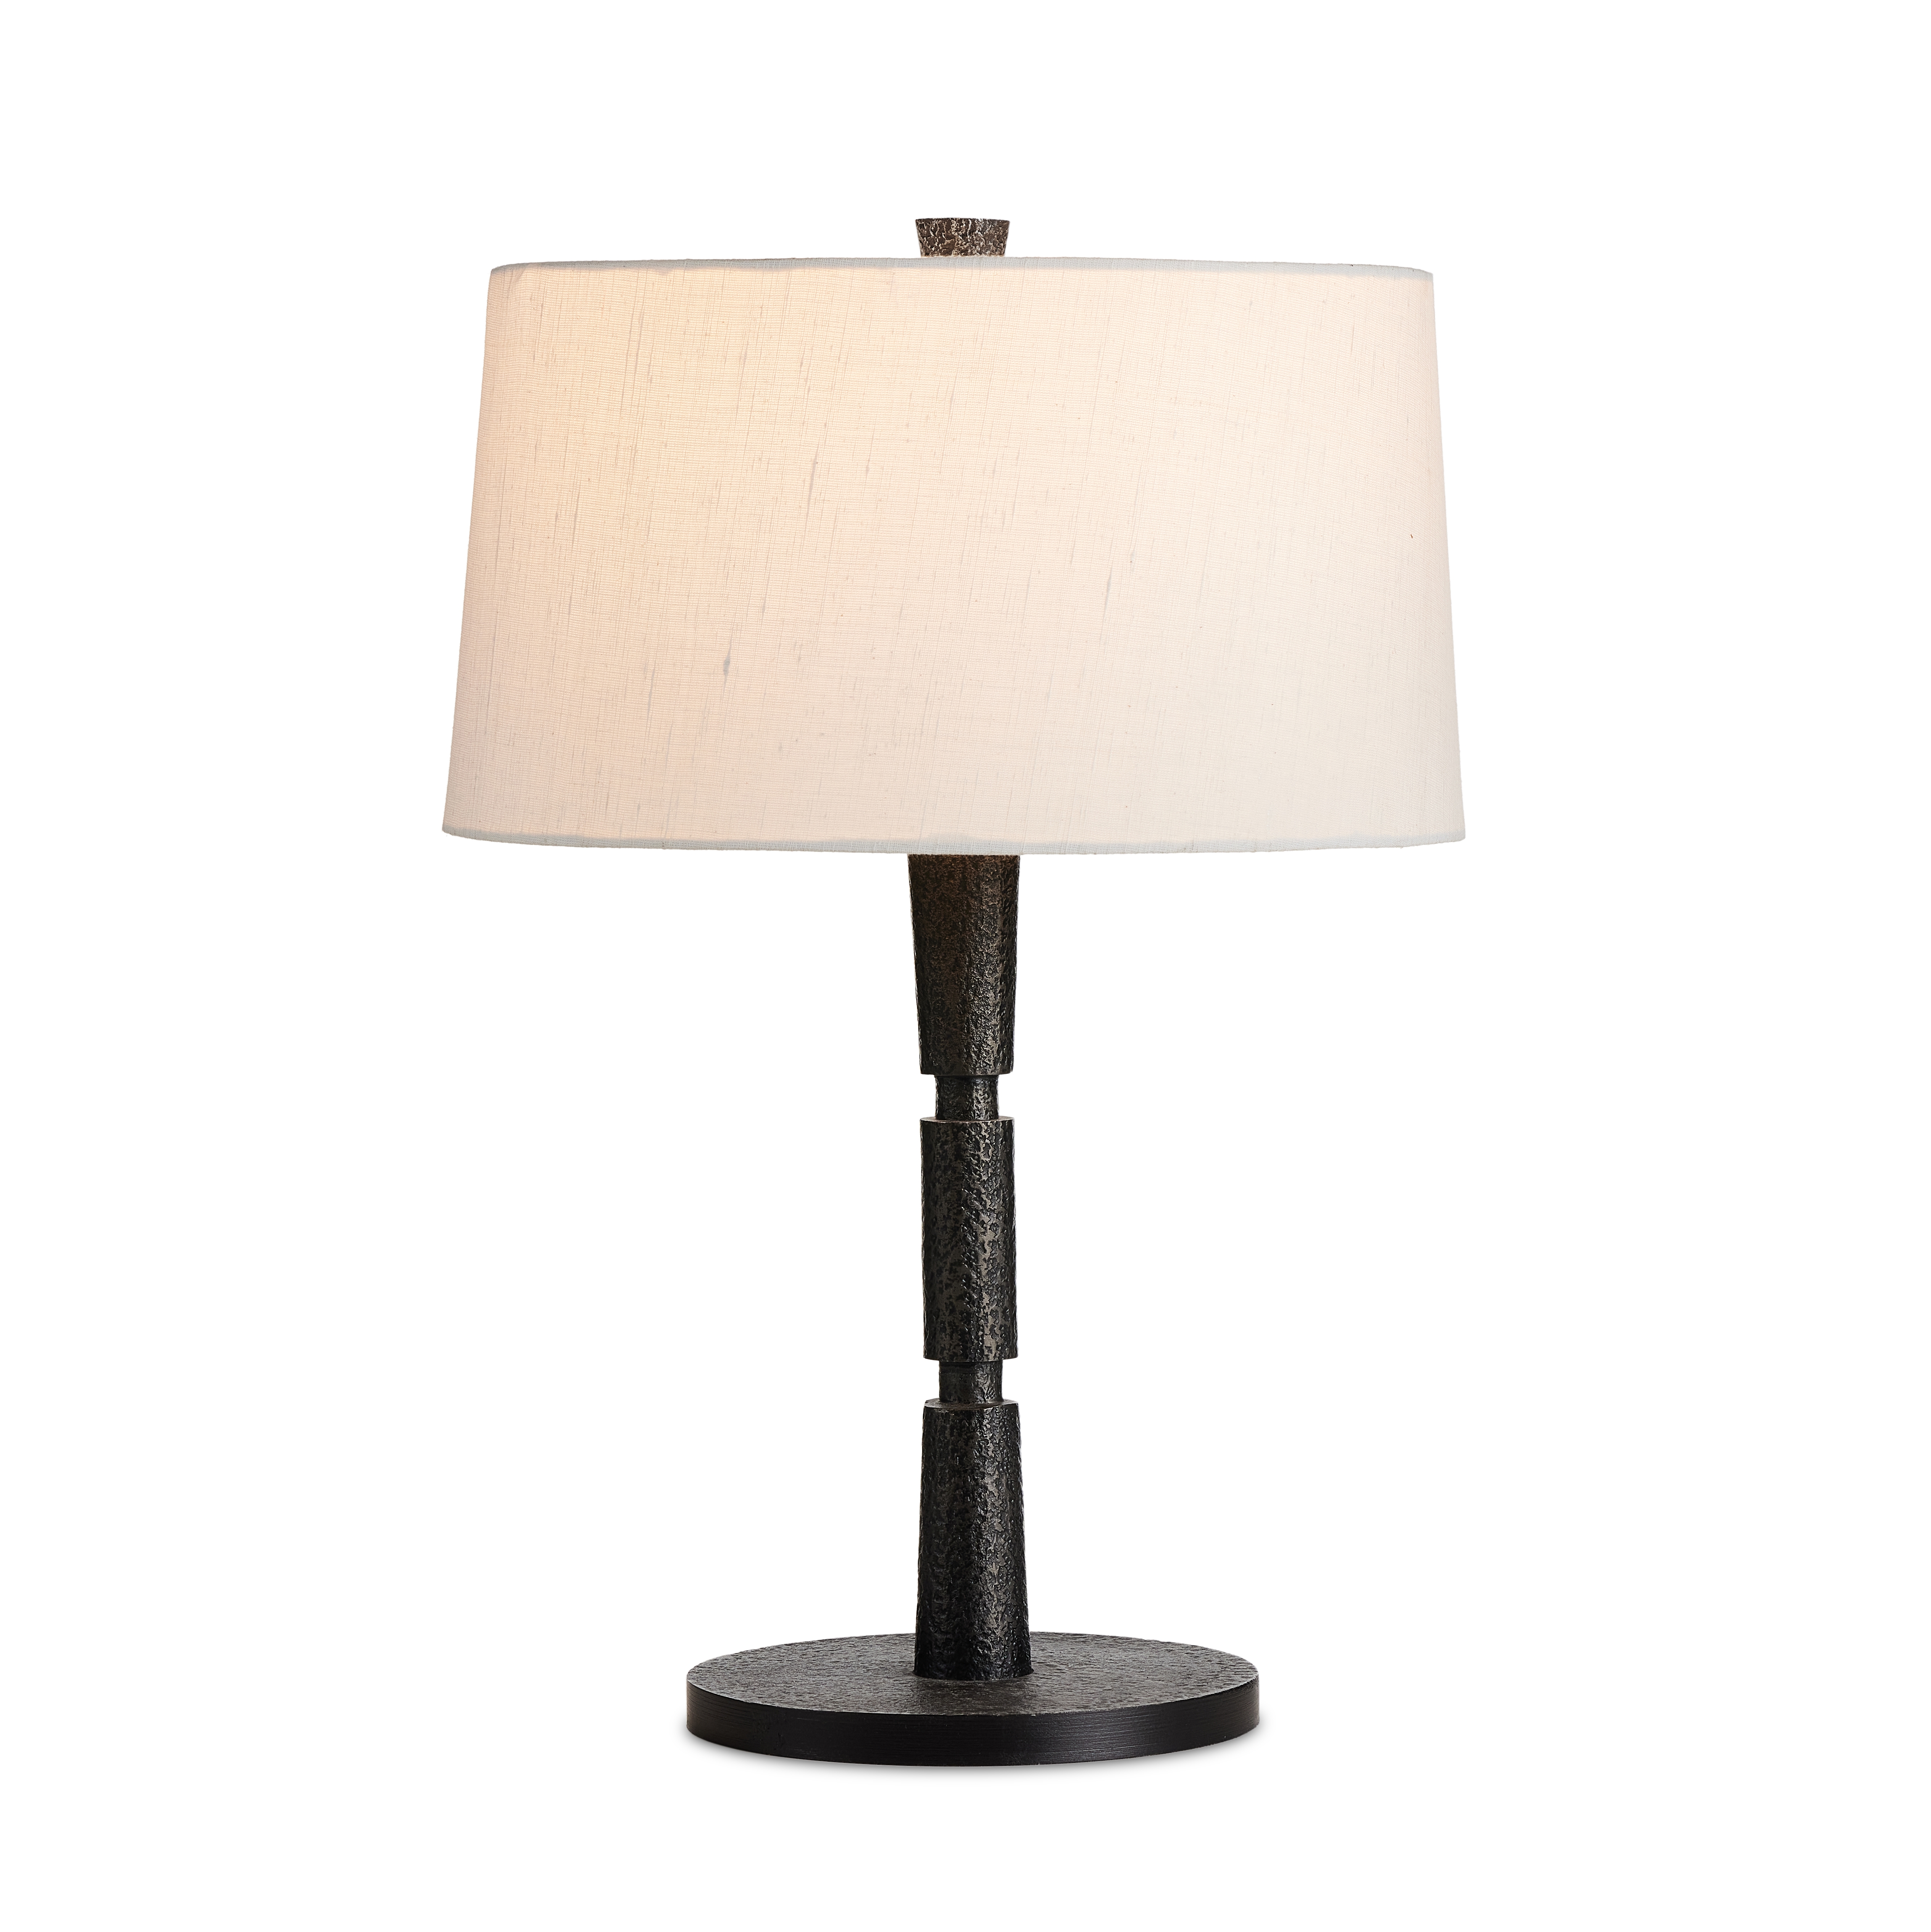 Fernando Table Lamp-Forged Black - Image 2